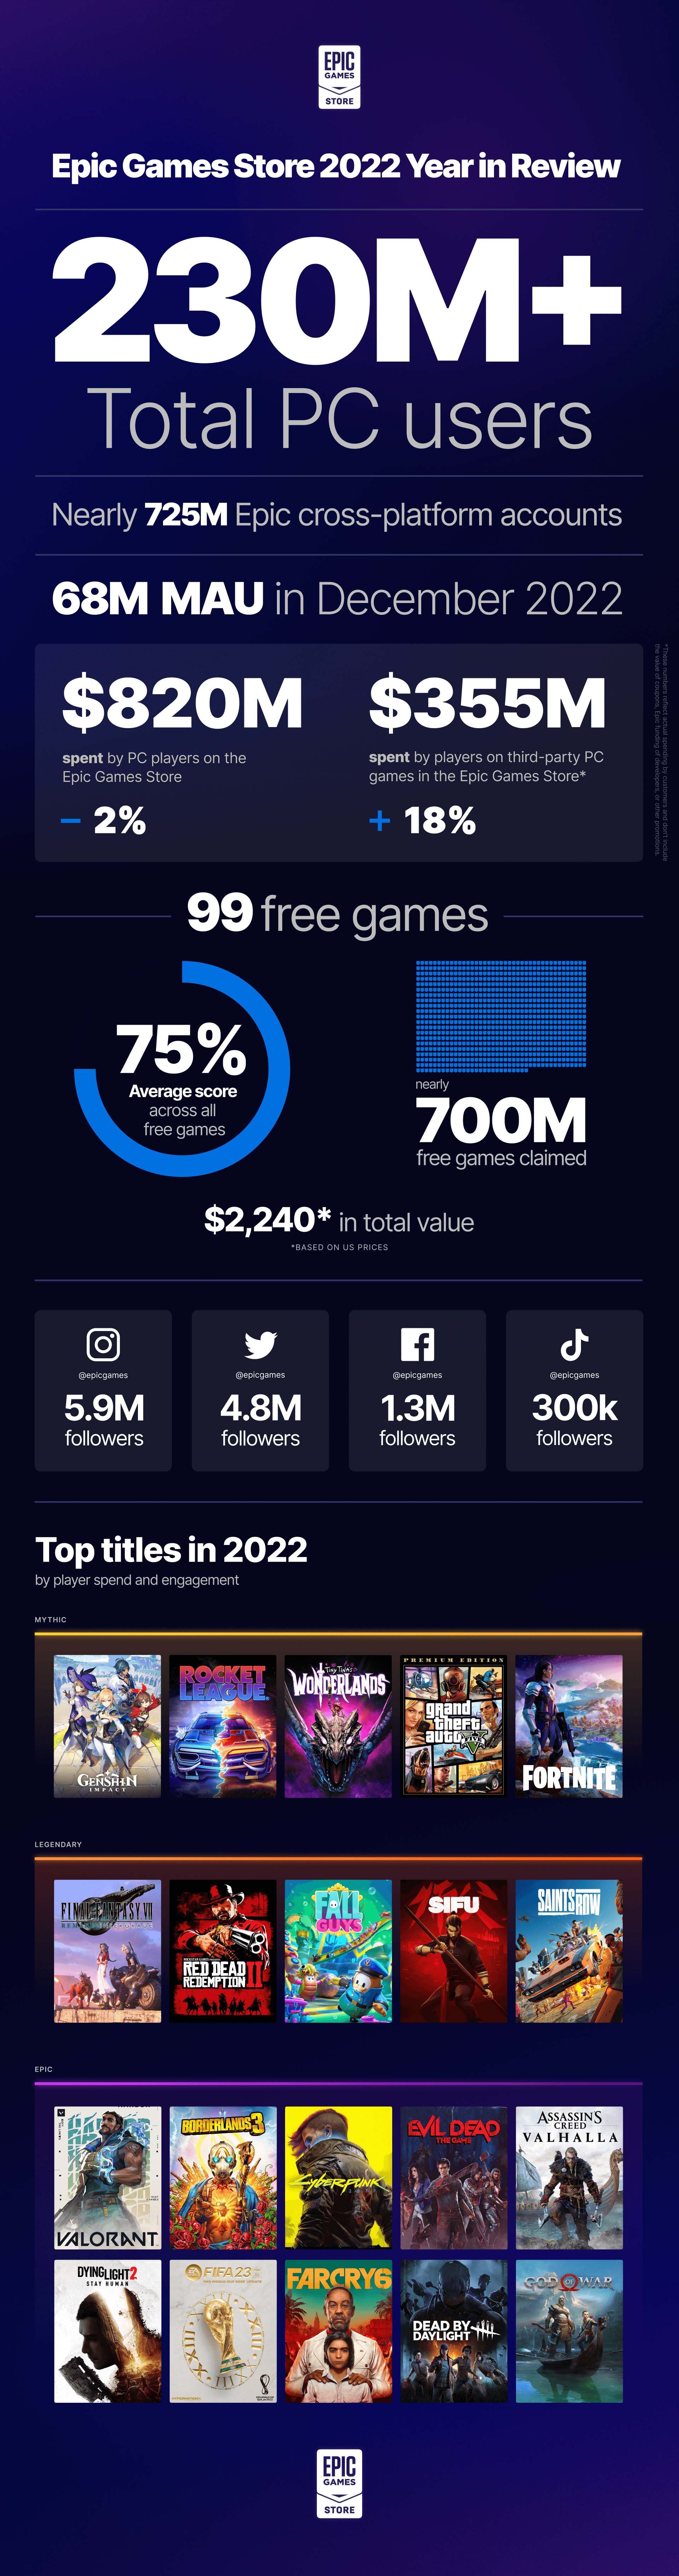 epic-games-store-2022-year-in-review-data-infographic-1920x7288